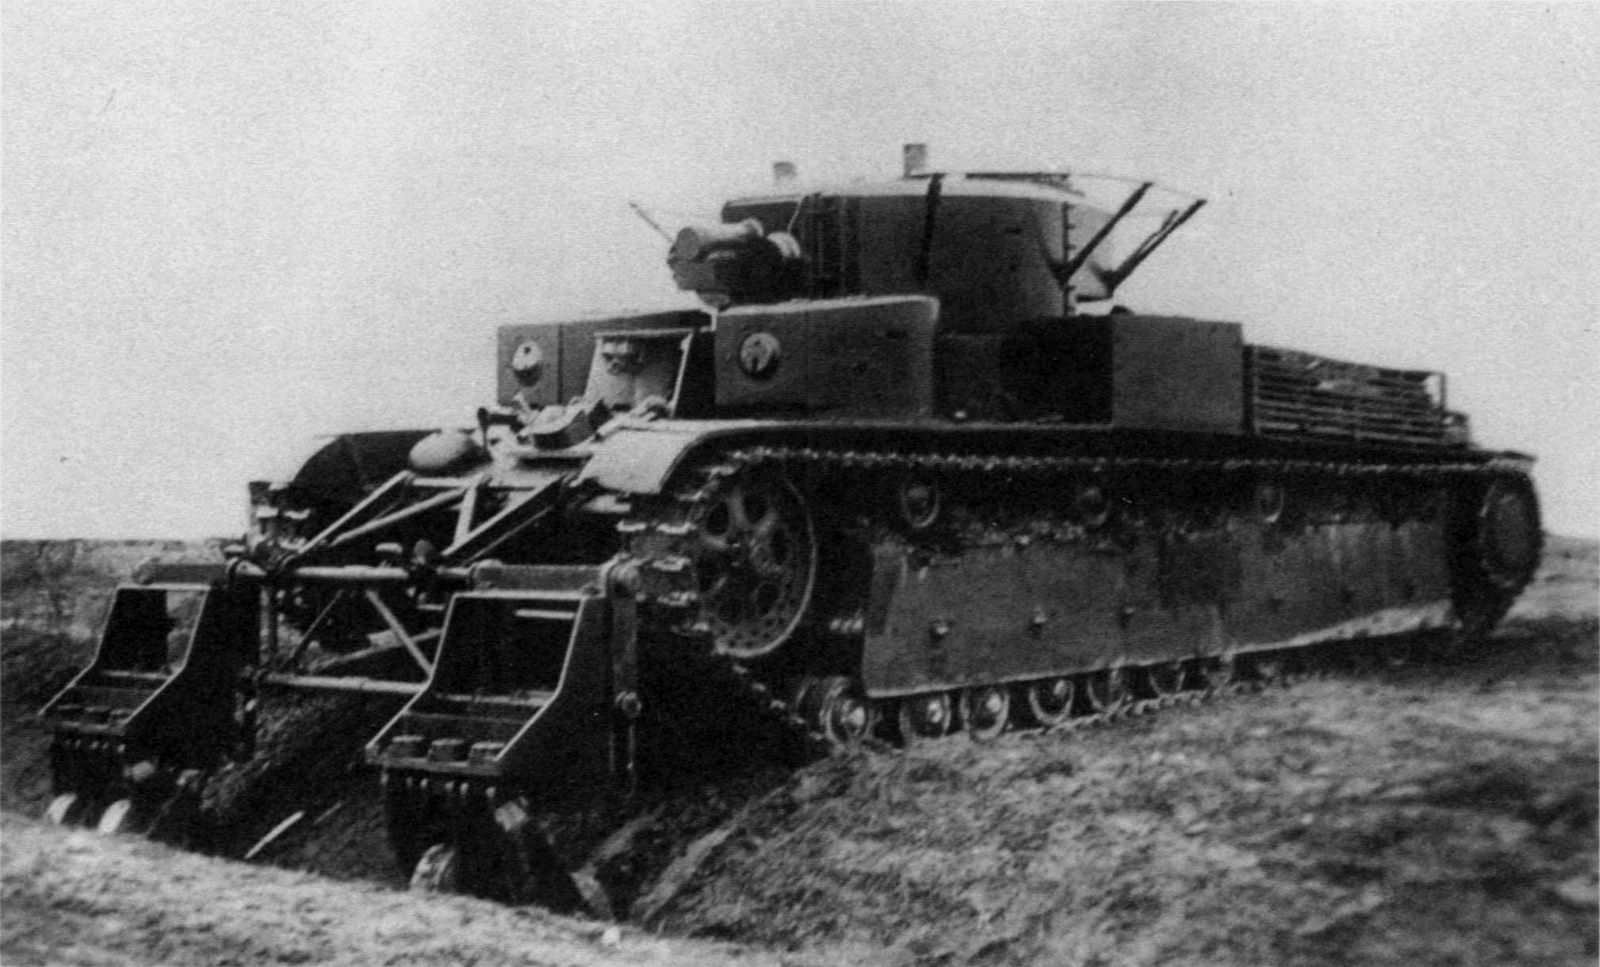 Soviet_T-28_heavy_tank_with_mine_trawls_during_a_test_to_cross_a_trench_in_